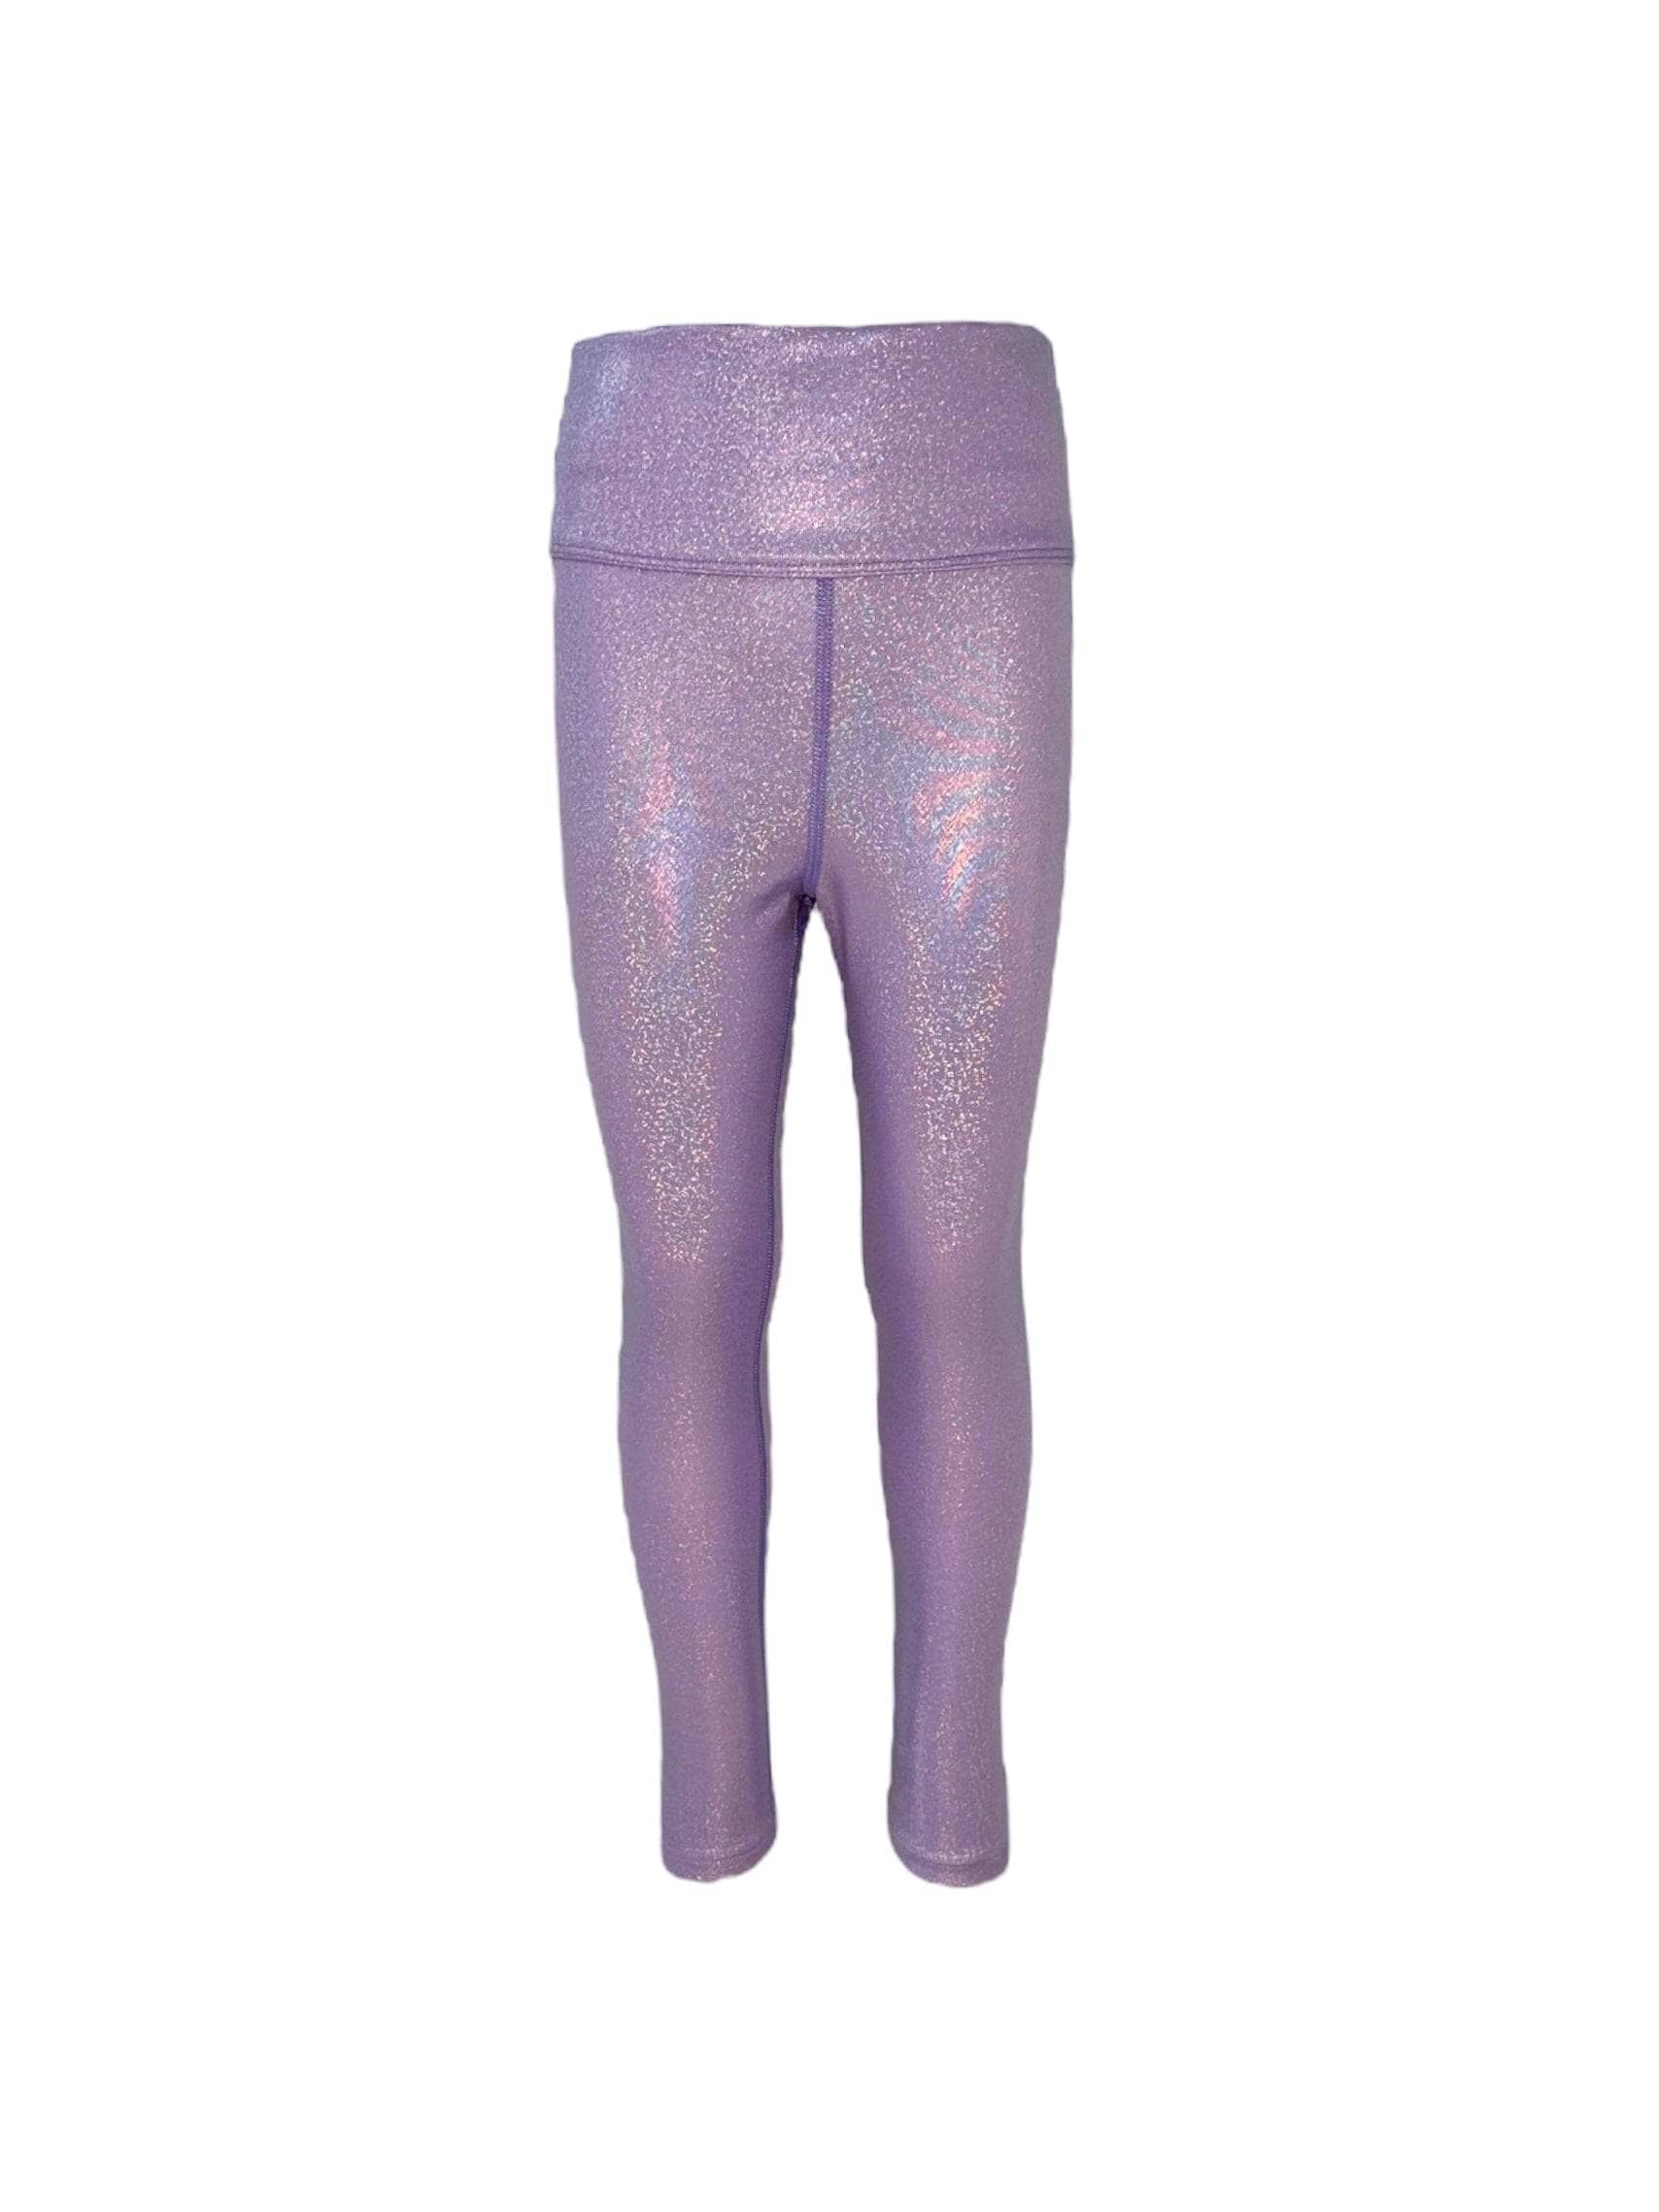 Ballet Legging  Womens active wear outfits, Cute workout outfits